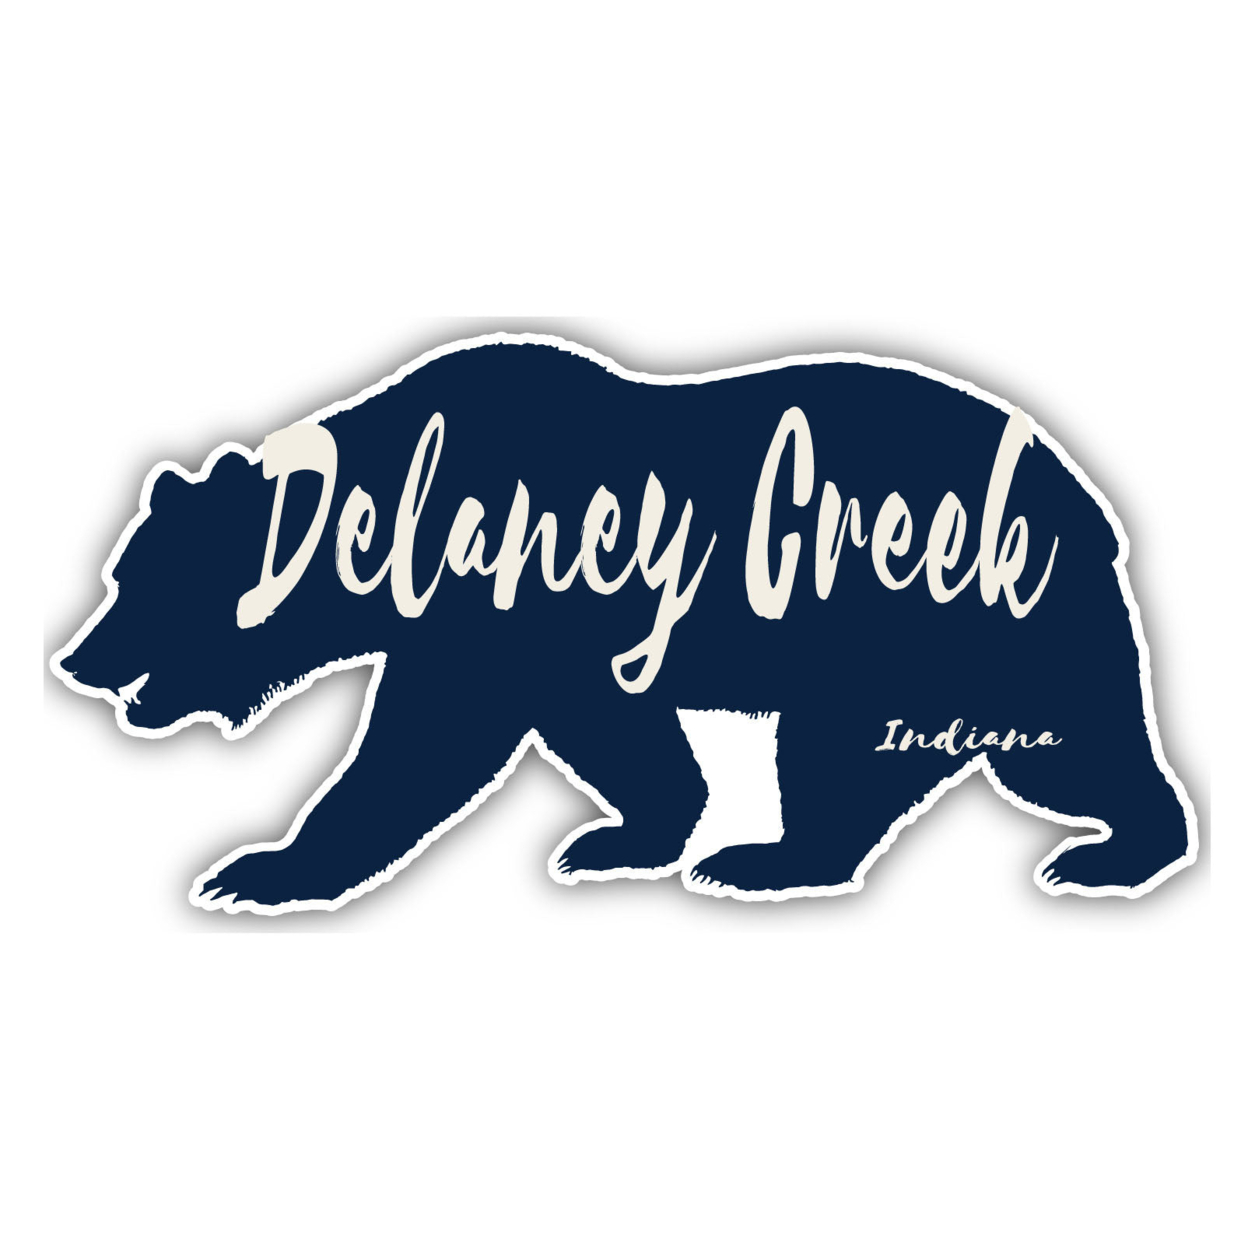 Delaney Creek Indiana Souvenir Decorative Stickers (Choose Theme And Size) - 4-Pack, 2-Inch, Bear